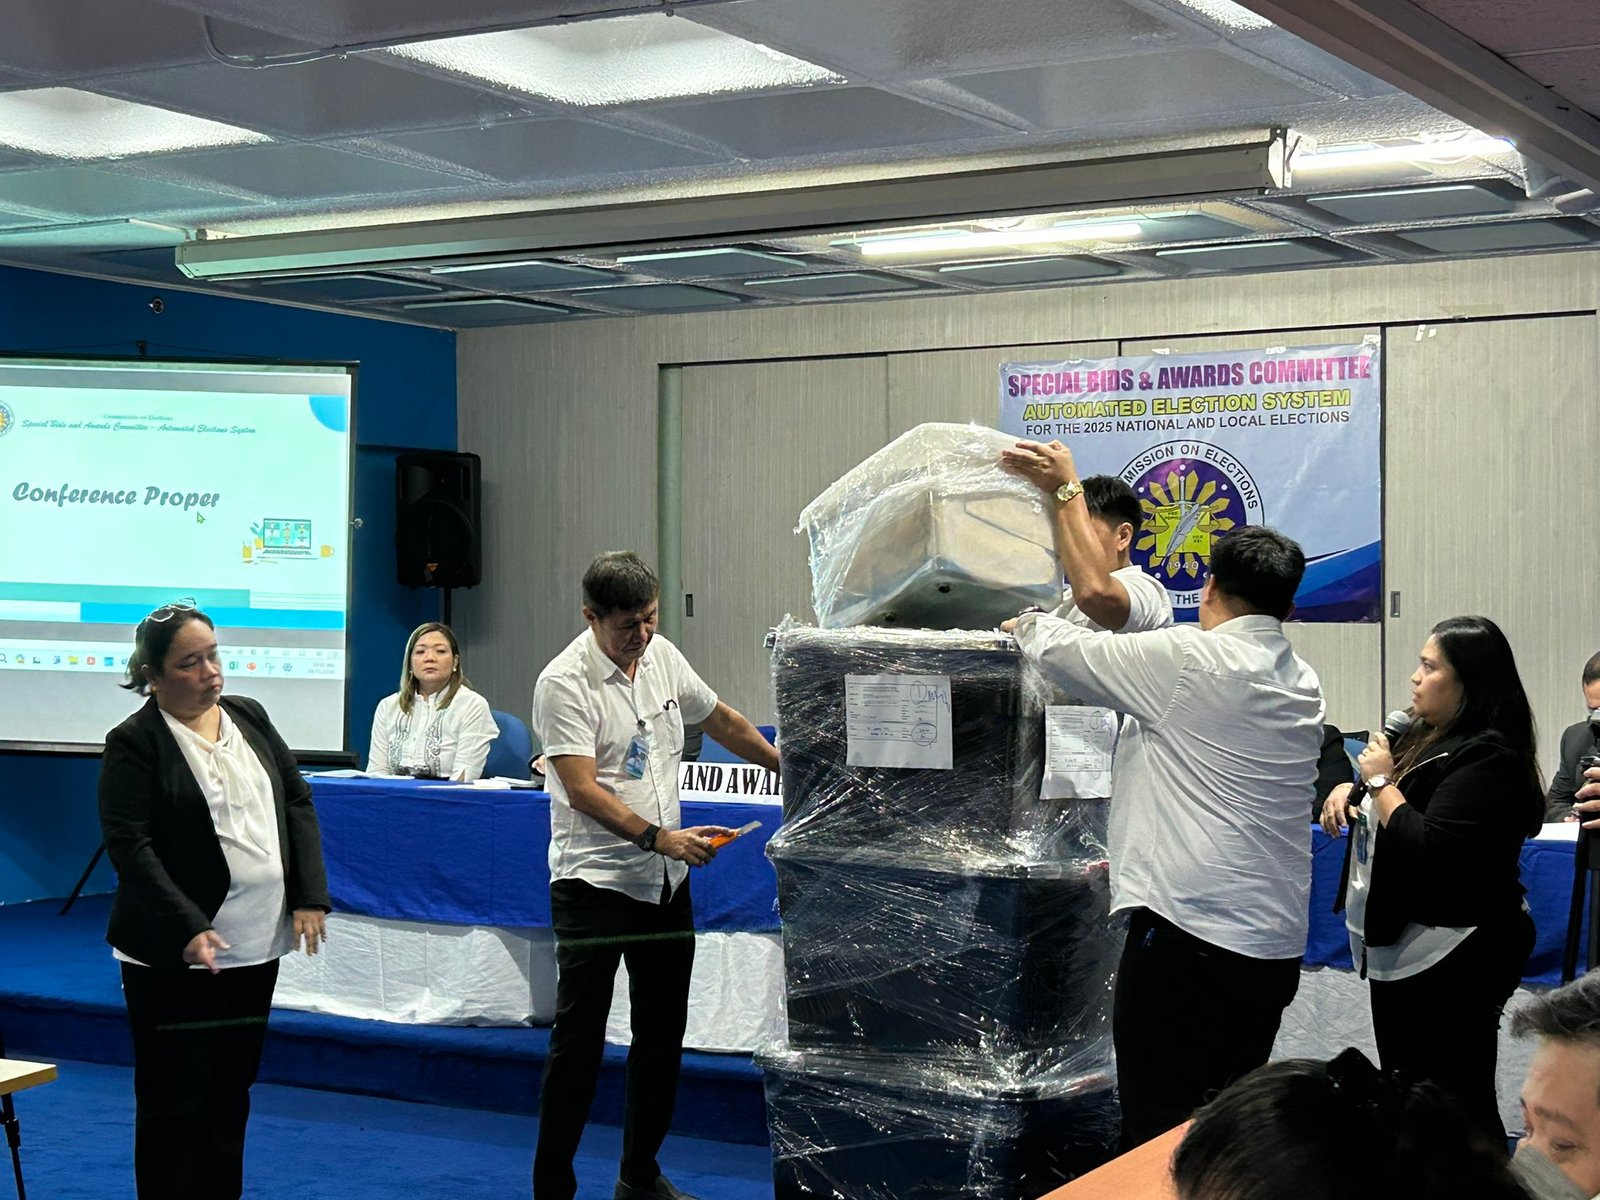 Namfrel Comelec exercised due diligence in approving Miru Systems